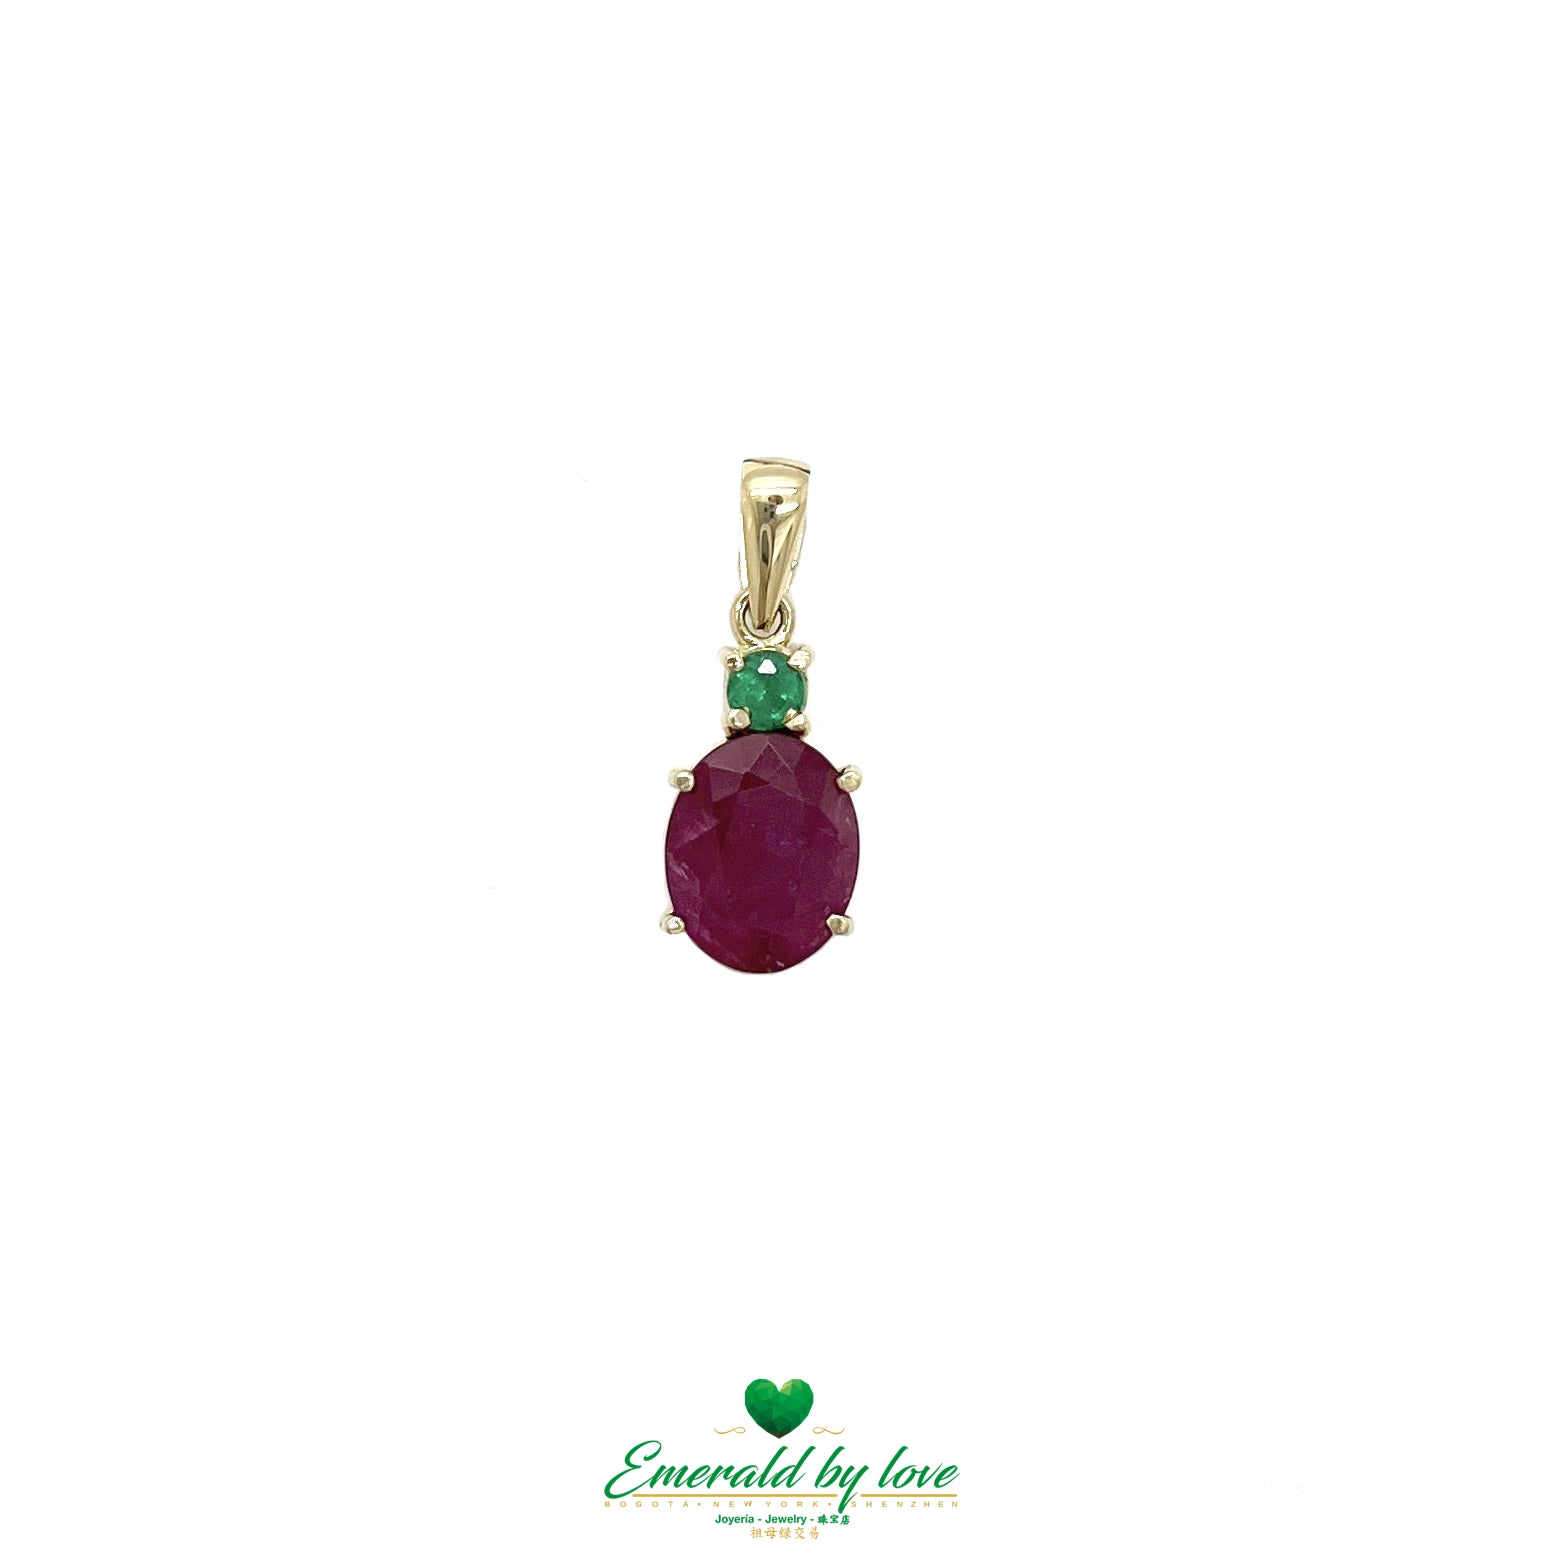 Exquisite 18K Yellow Gold Pendant with oval Ruby and Round Colombian Emerald